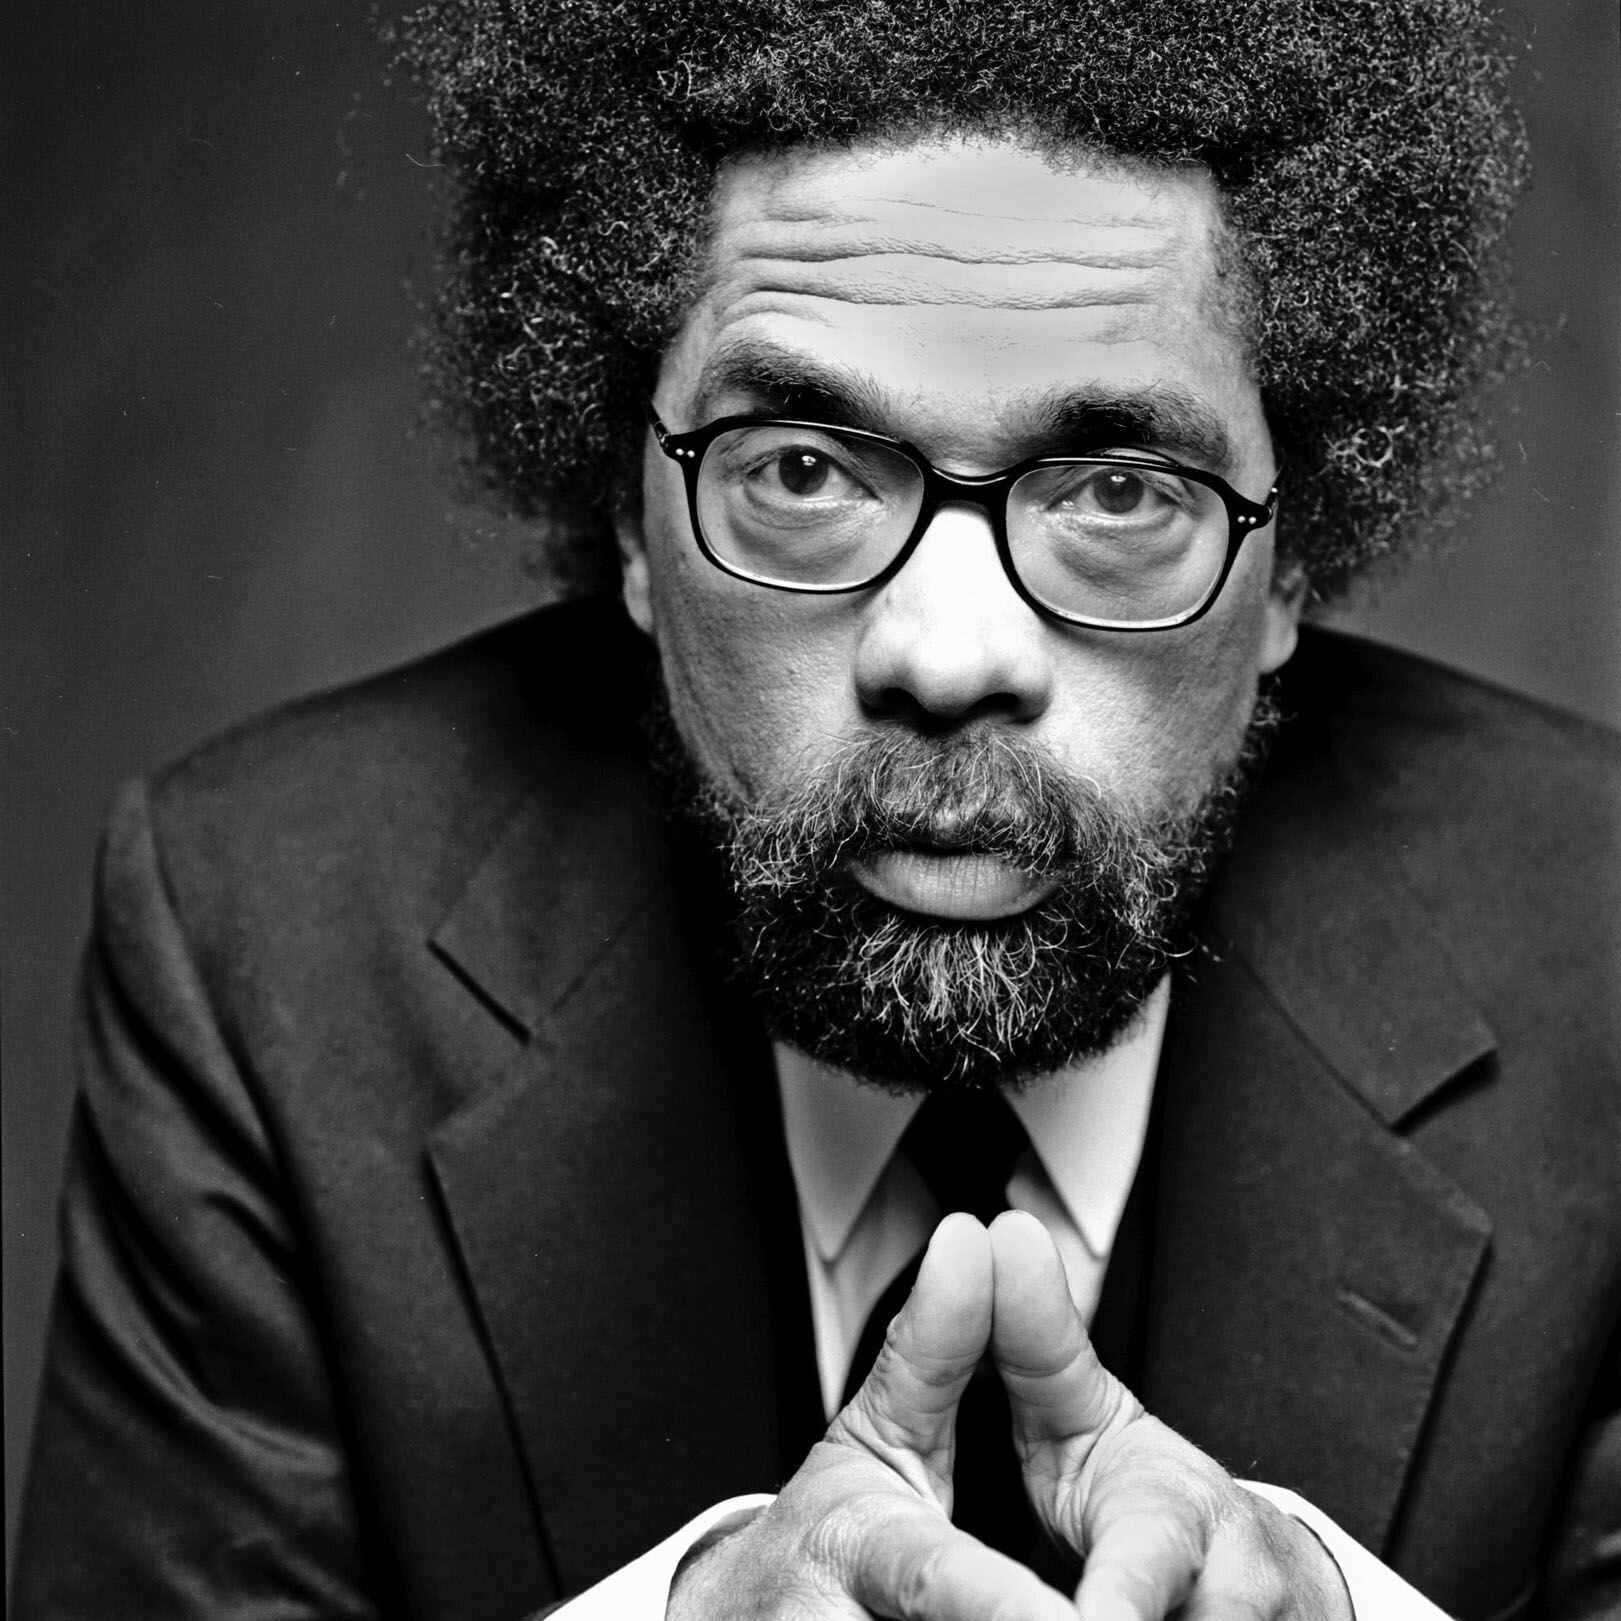 “In this historic moment of reckoning, let us remember those monumental events of barbarity that shape who and what we are. The Tulsa massacre of 1921 was an American crime against humanity. Let us come together as black and white human beings to rectify it!” - -Dr. Cornel West